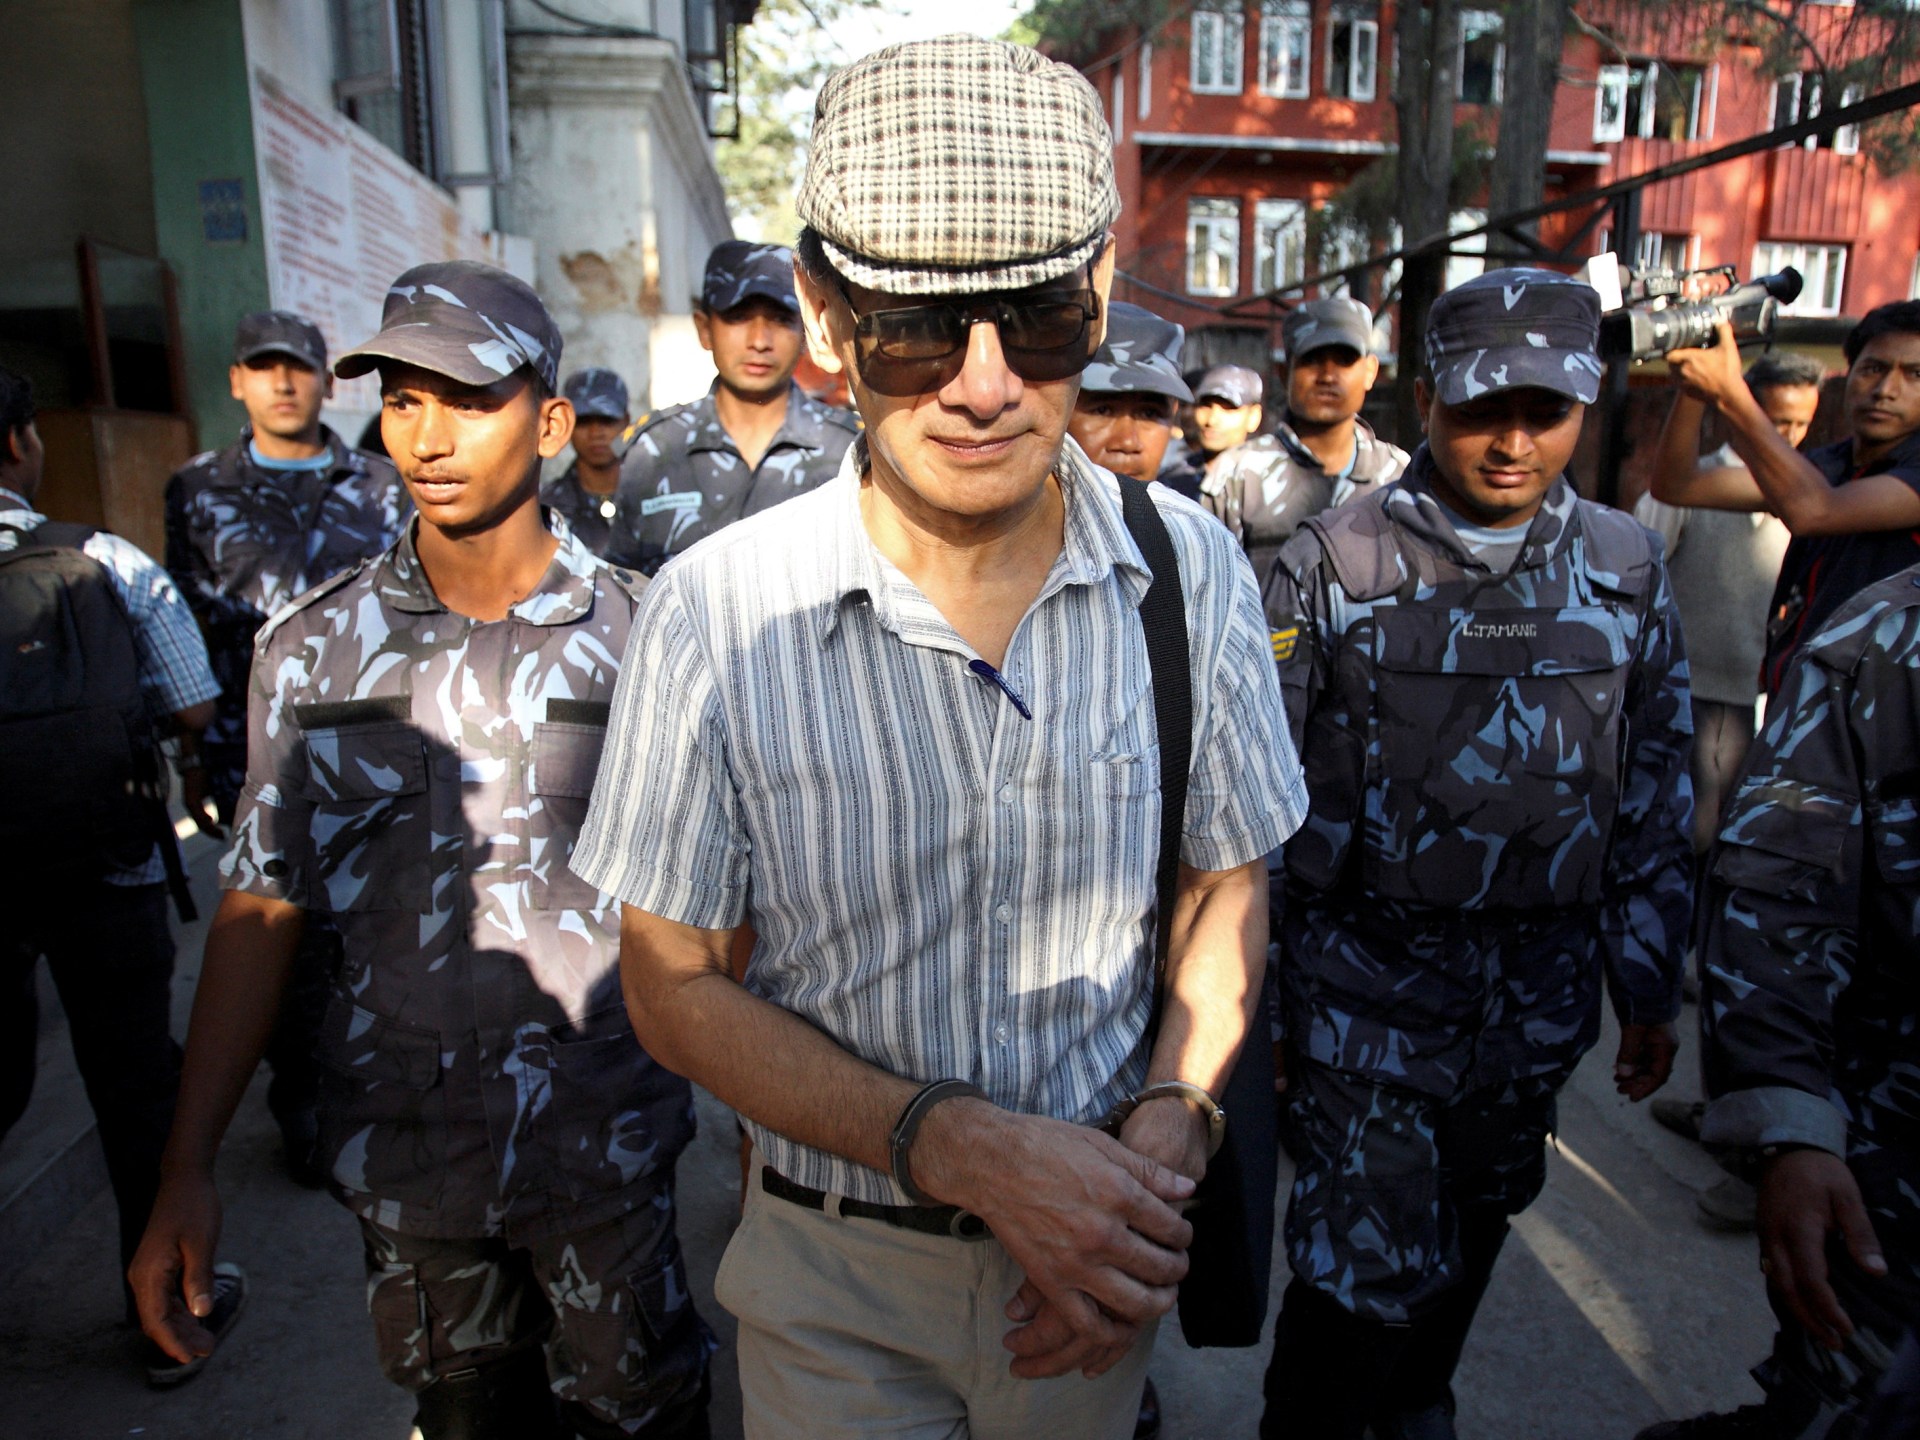 Charles Sobhraj, convicted murderer, has a new story to tell